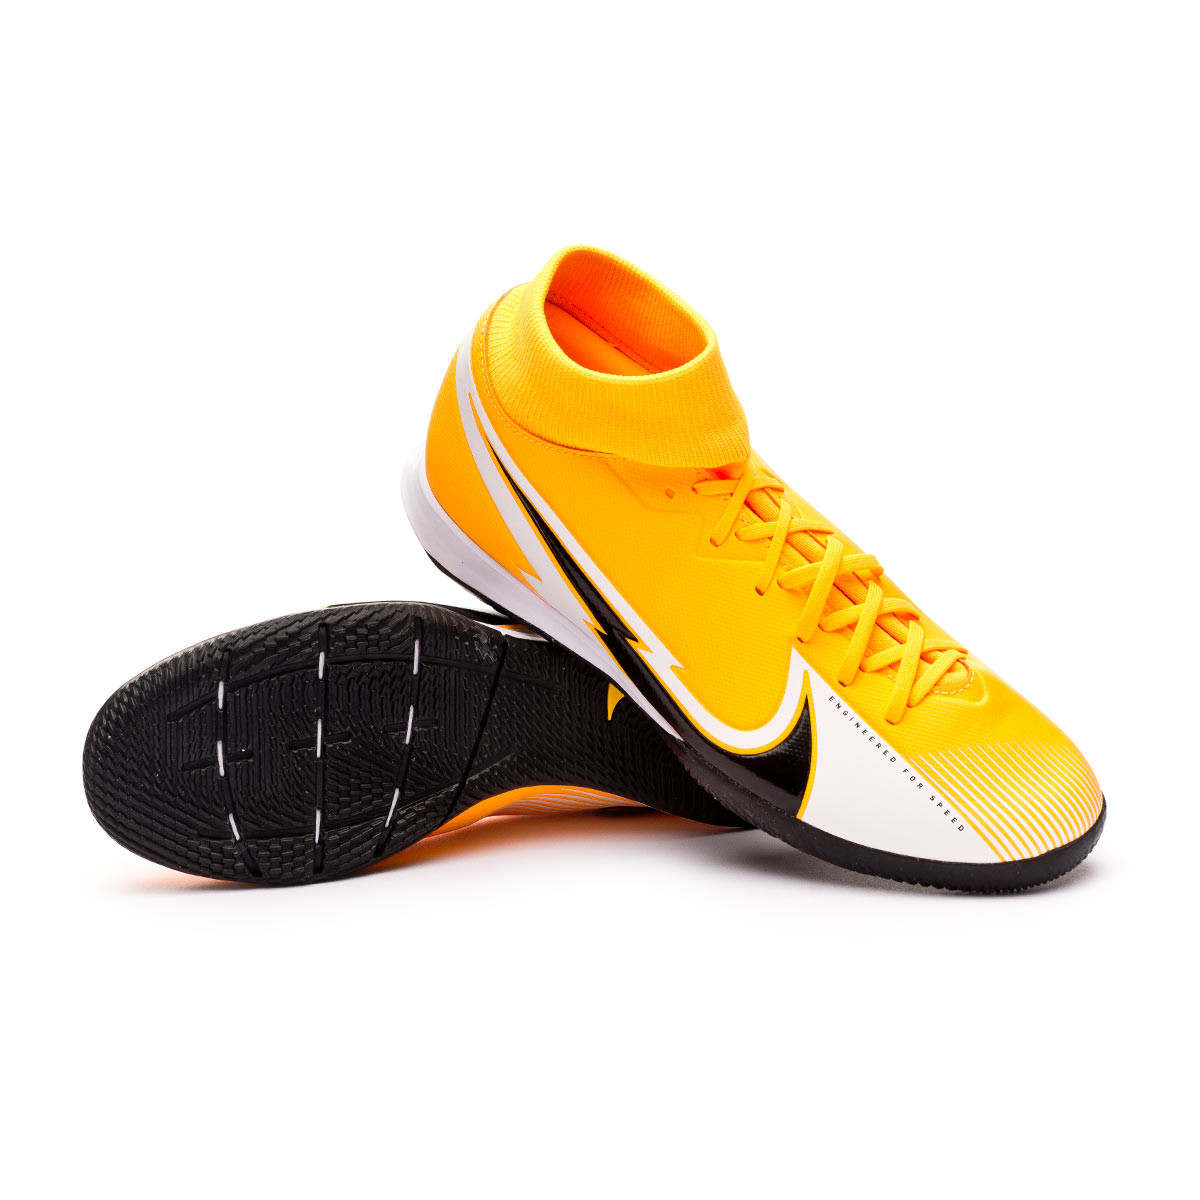 mercurial superfly 7 academy ic